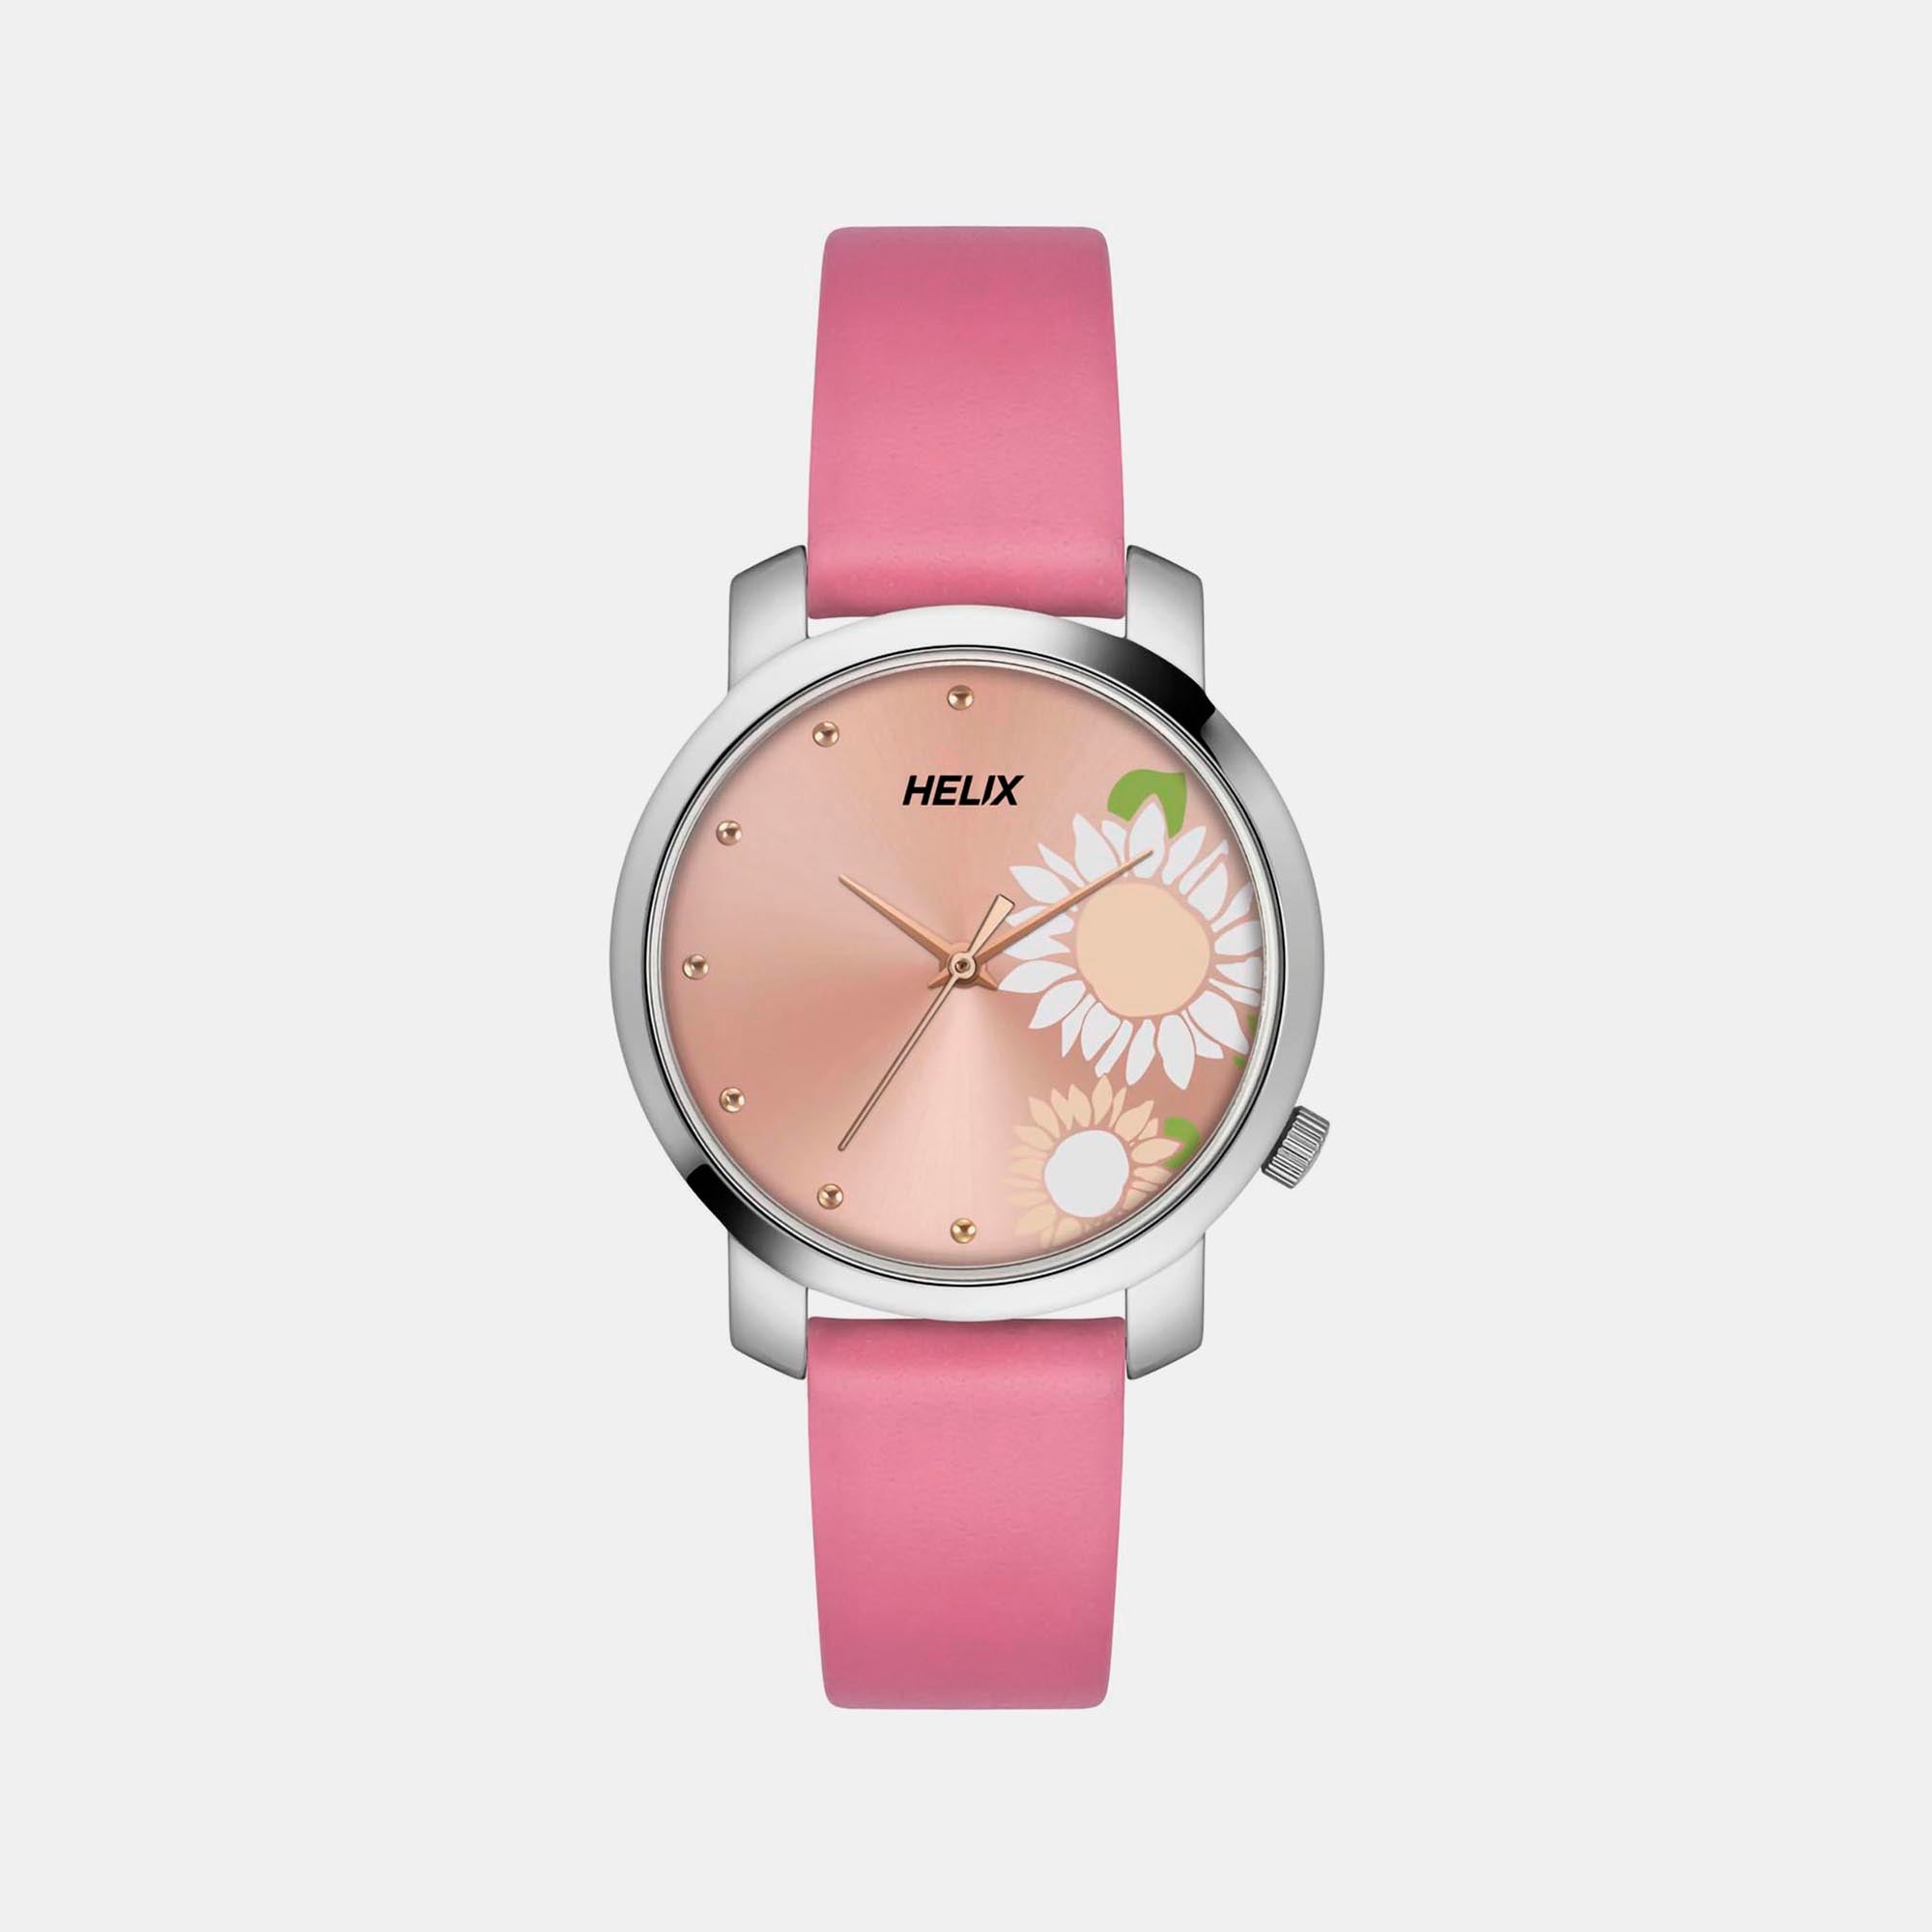 Buy CRAB Ladies_832 Fancy & Rich Look Baby Pink Dial- Leather Strap Watch  (Rose Gold) at Amazon.in